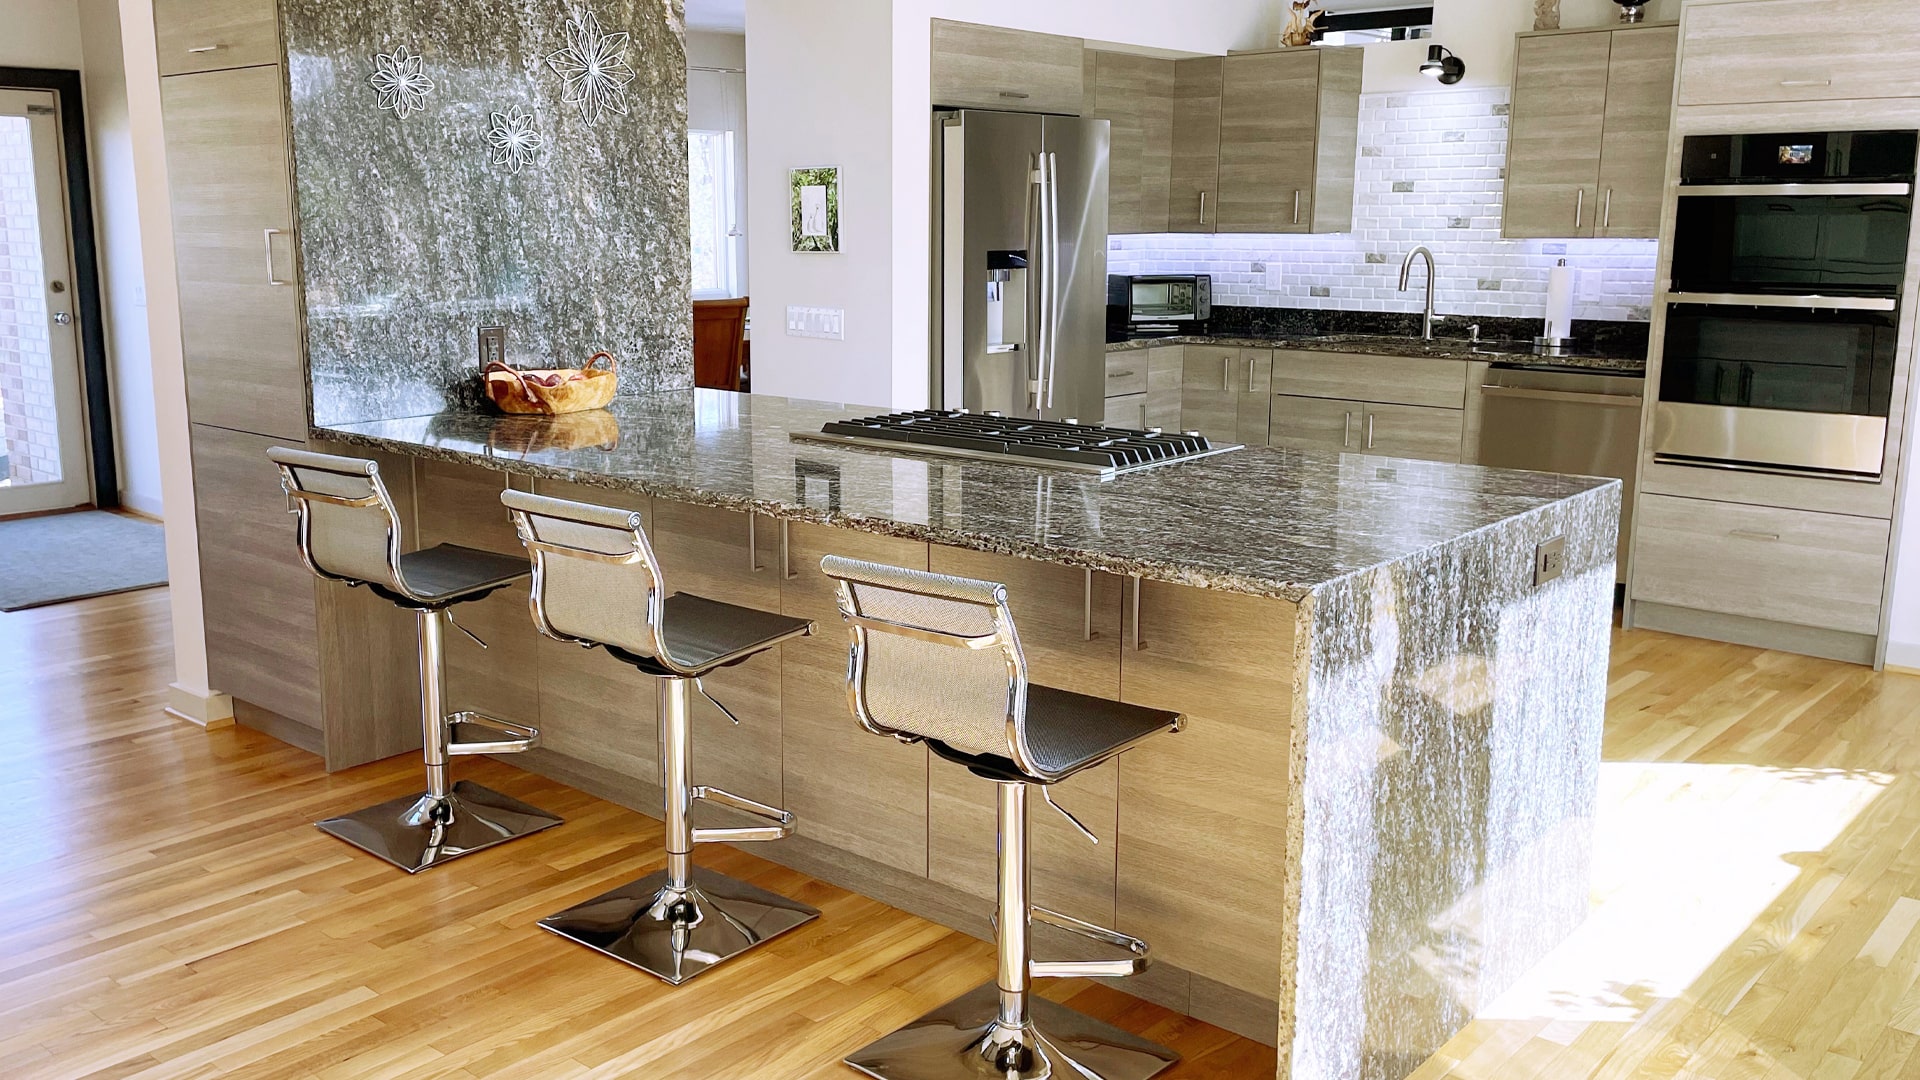 Contemporary kitchen remodel with a large, stone waterfall kitchen island with barstool seating